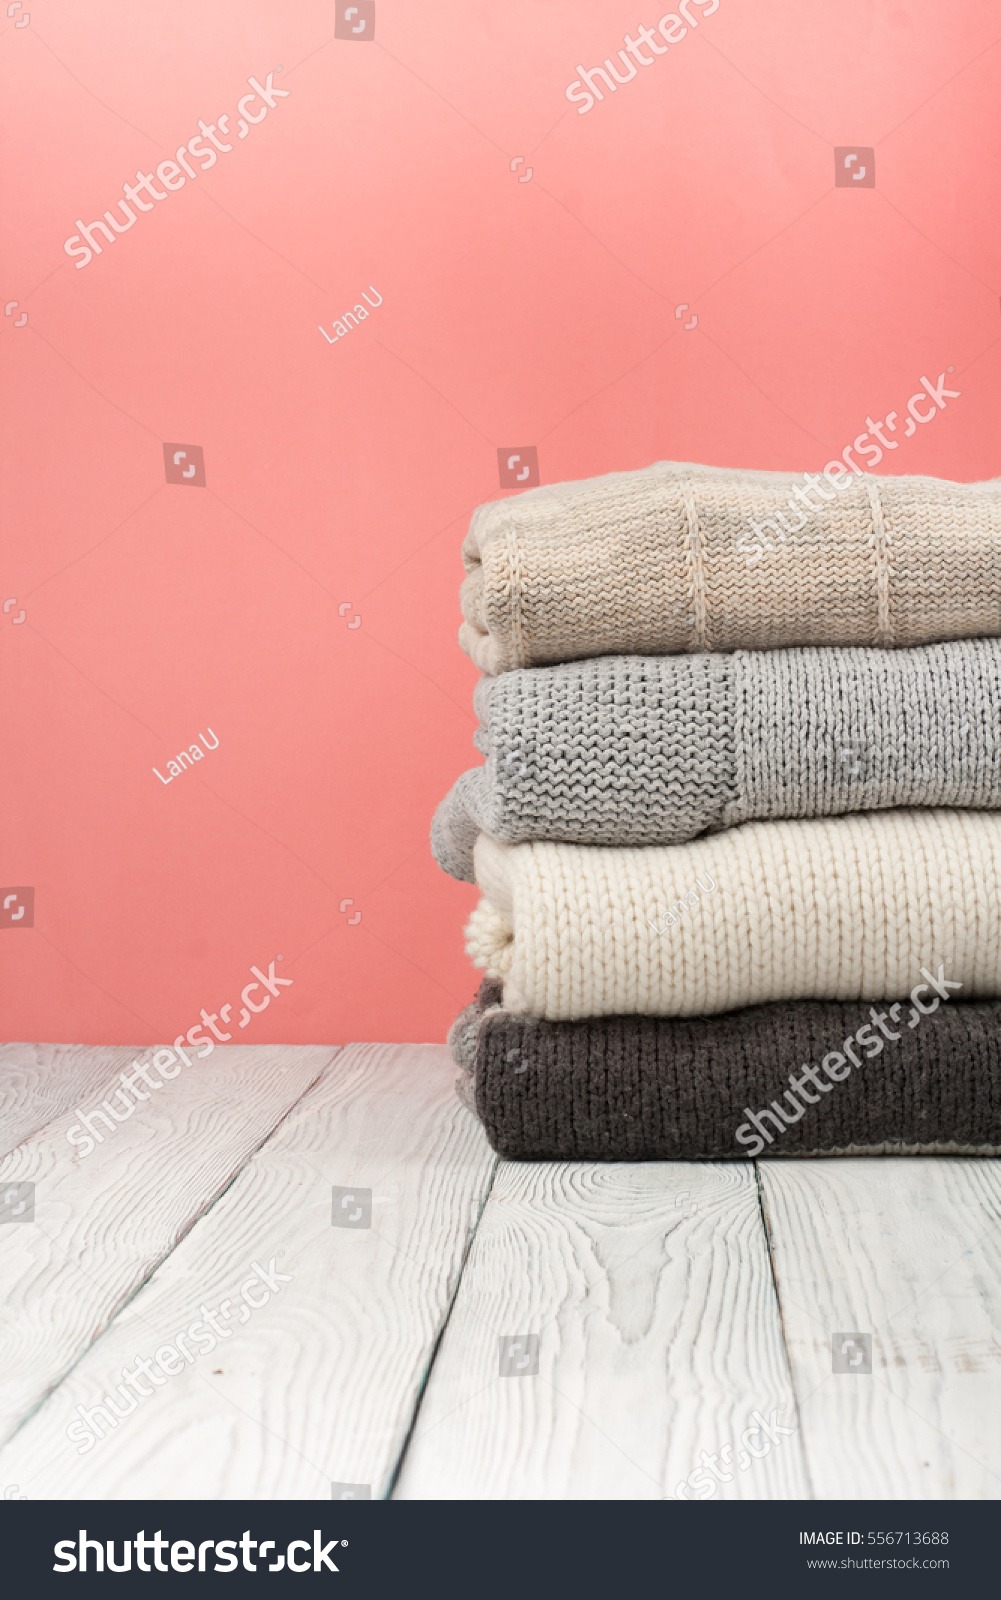 Knitted wool sweaters. Pile of knitted winter clothes on blue wooden background, sweaters, knitwear, space for text. #556713688